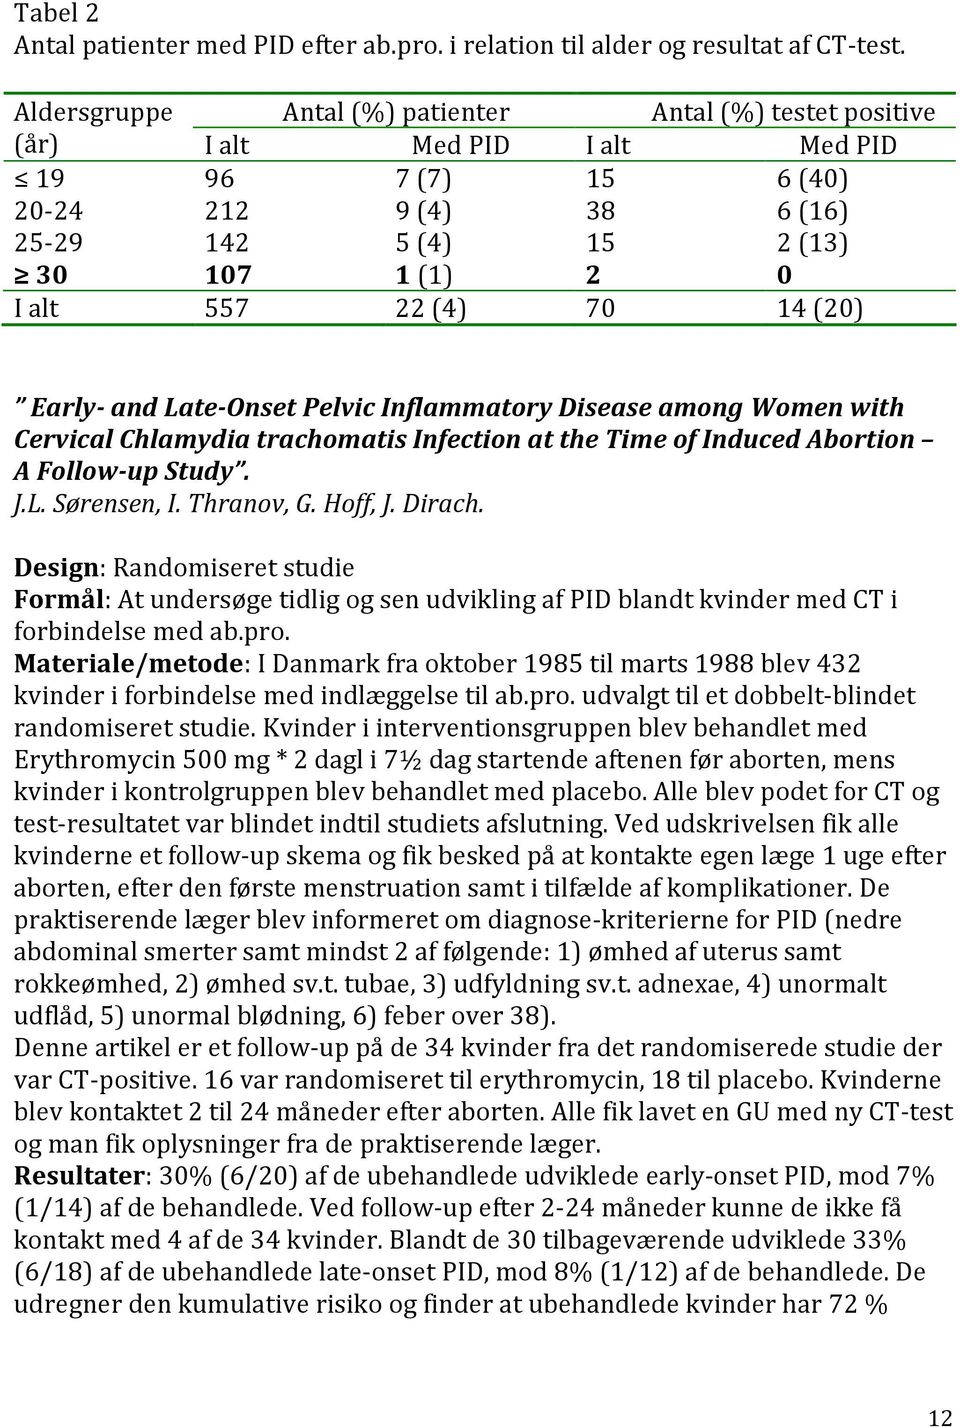 70 14 (20) Early- and Late-Onset Pelvic Inflammatory Disease among Women with Cervical Chlamydia trachomatis Infection at the Time of Induced Abortion A Follow-up Study. J.L. Sørensen, I. Thranov, G.